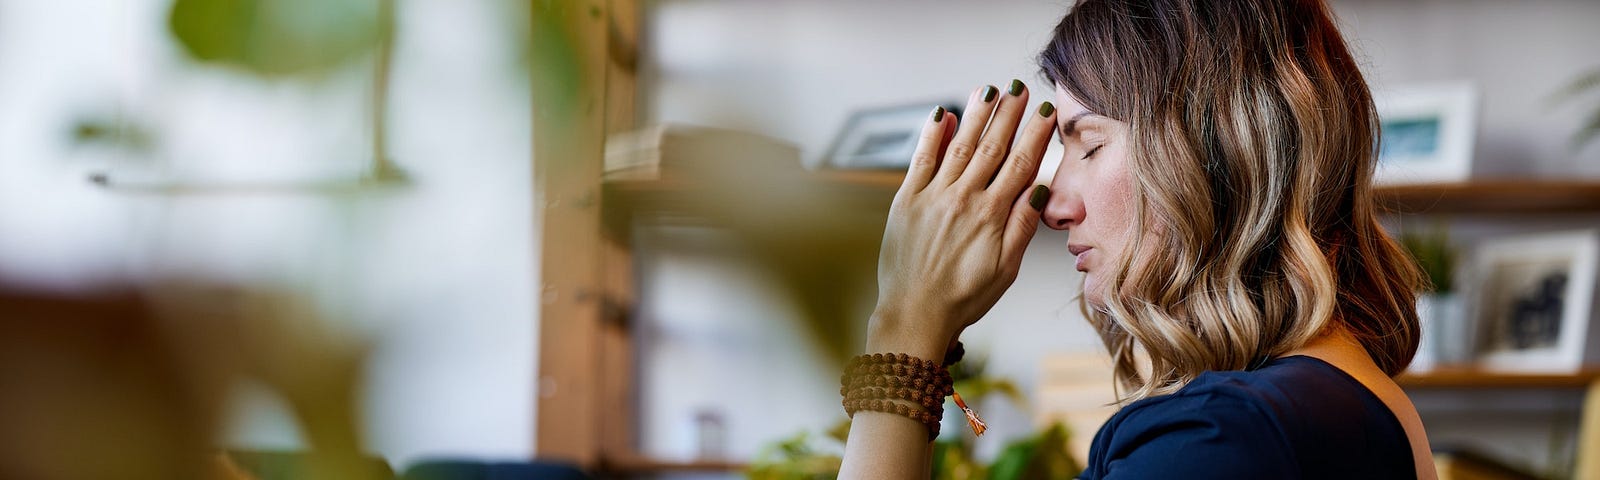 A woman in a dark blue shirt in her room with her hands in a prayer shape and mala beads around her wrist